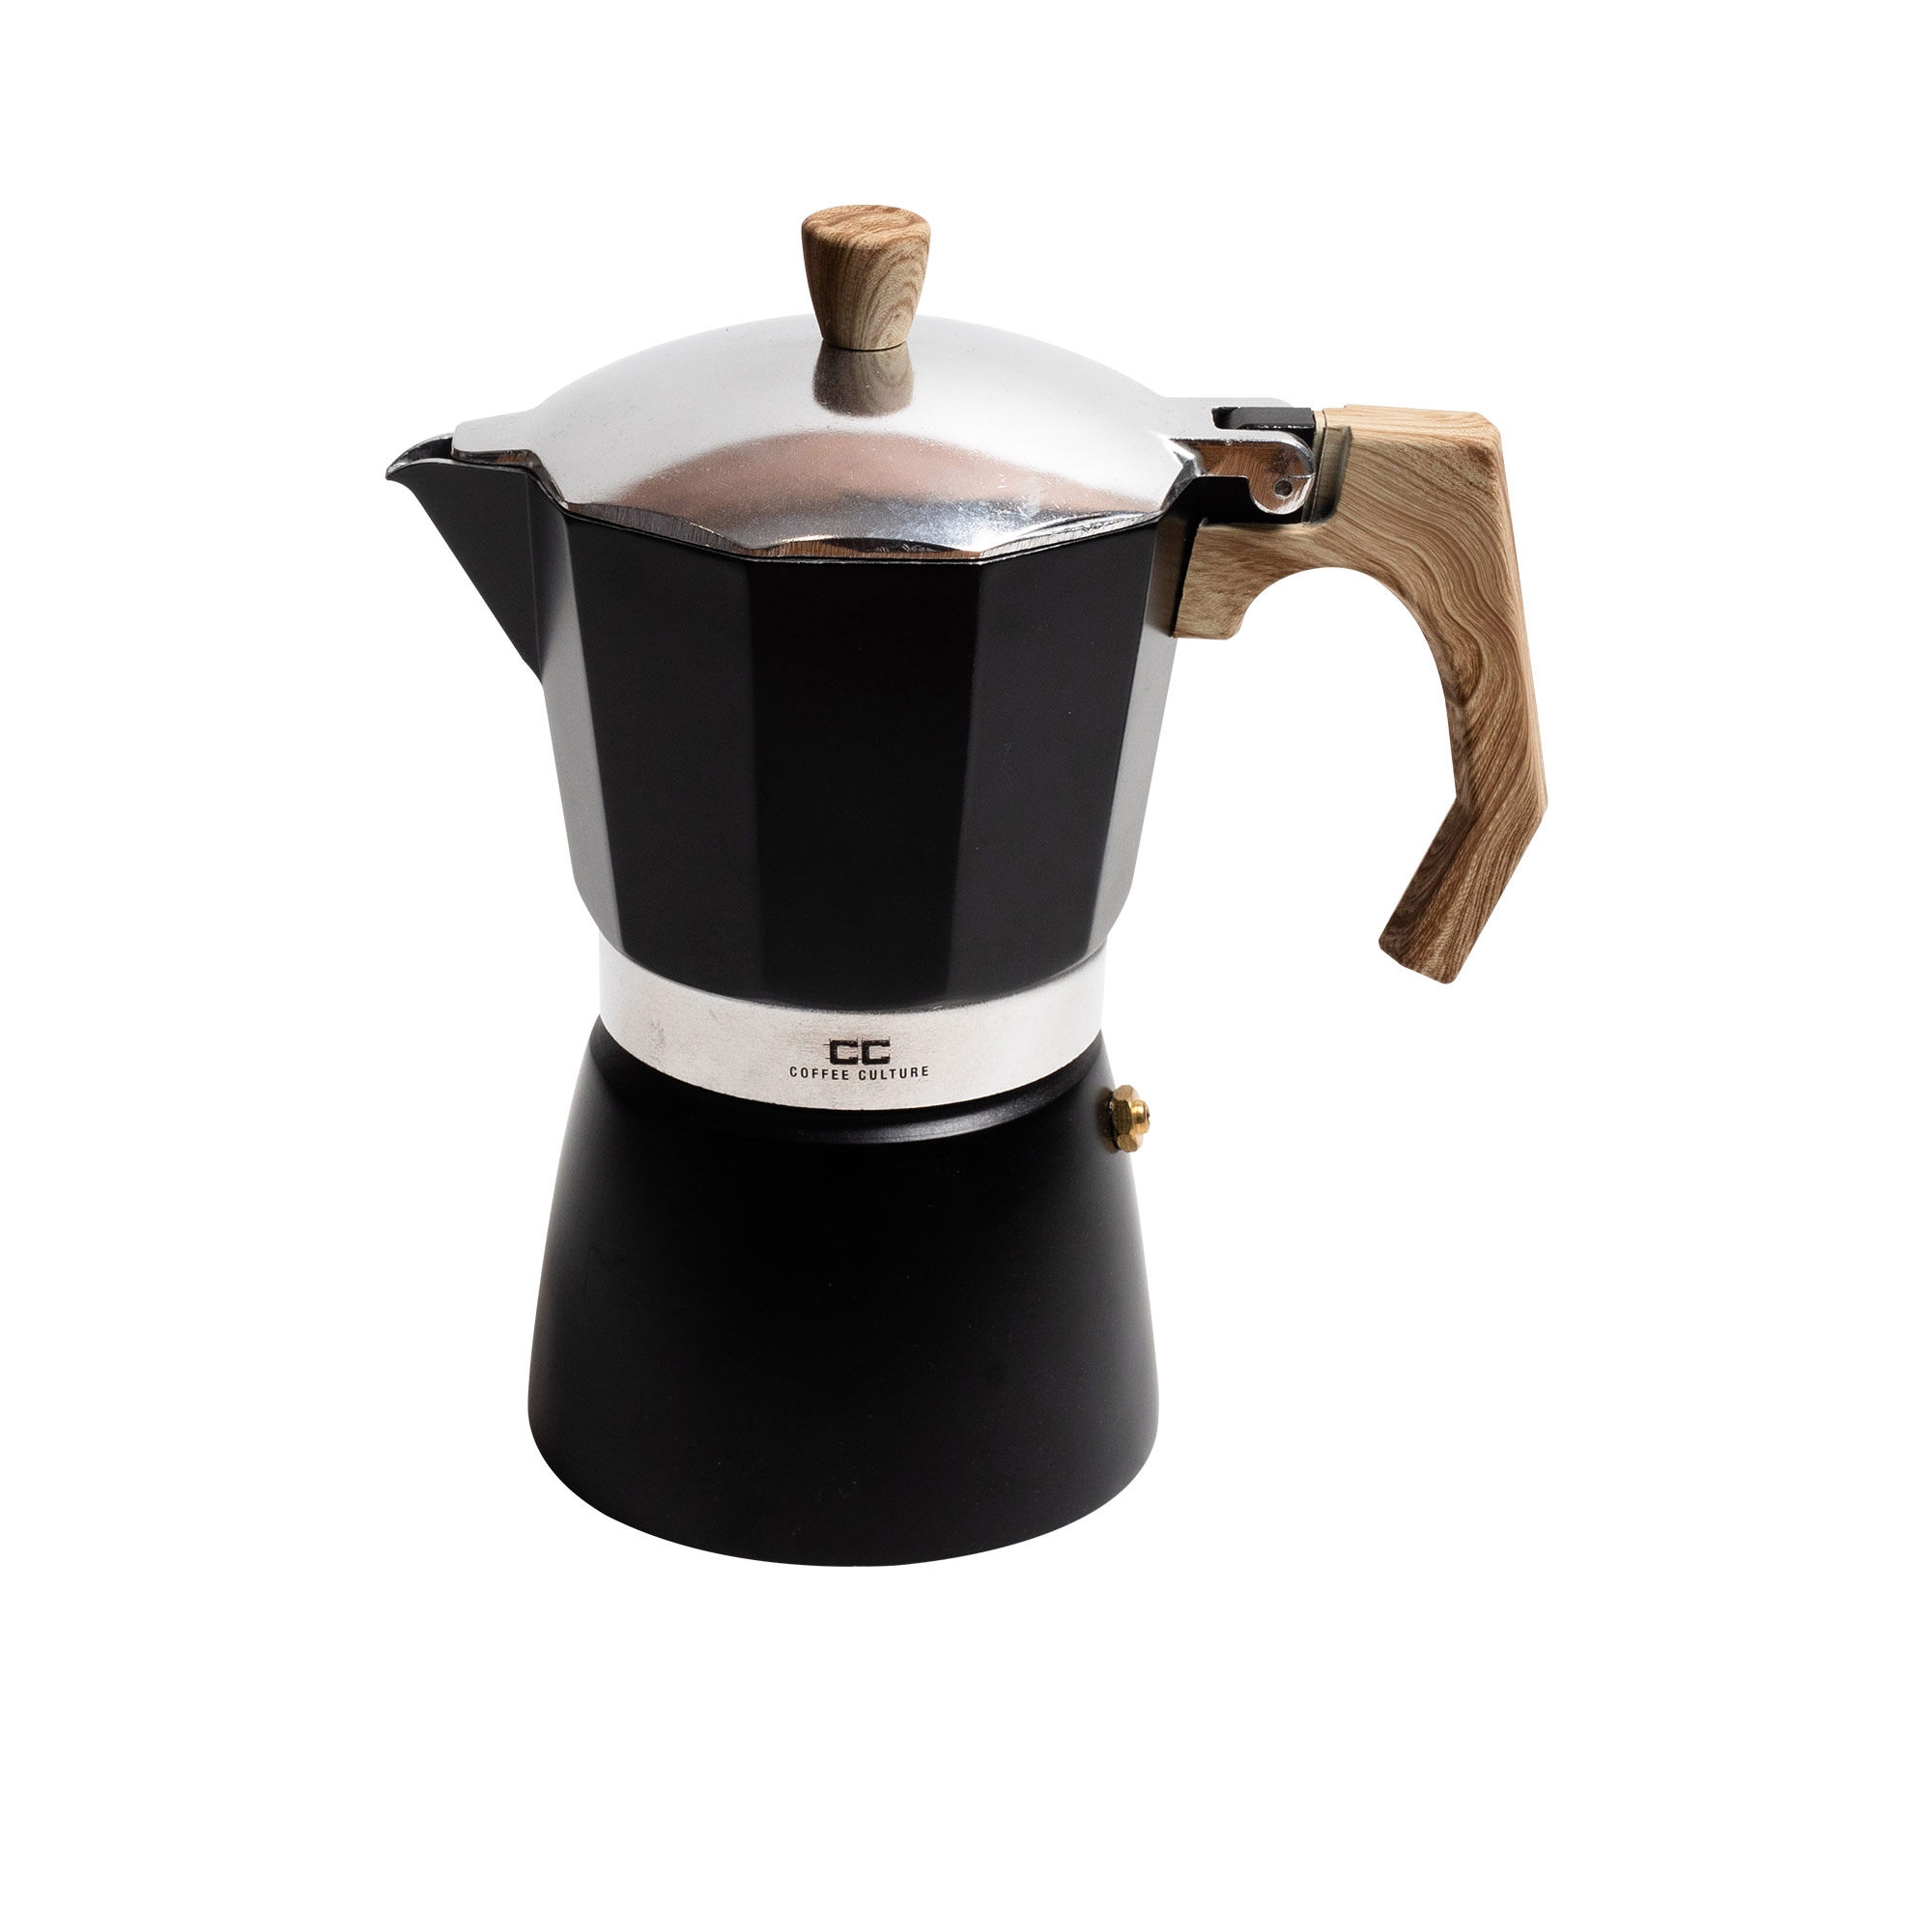 Coffee Culture Coffee Maker 6 Cup Black Image 1